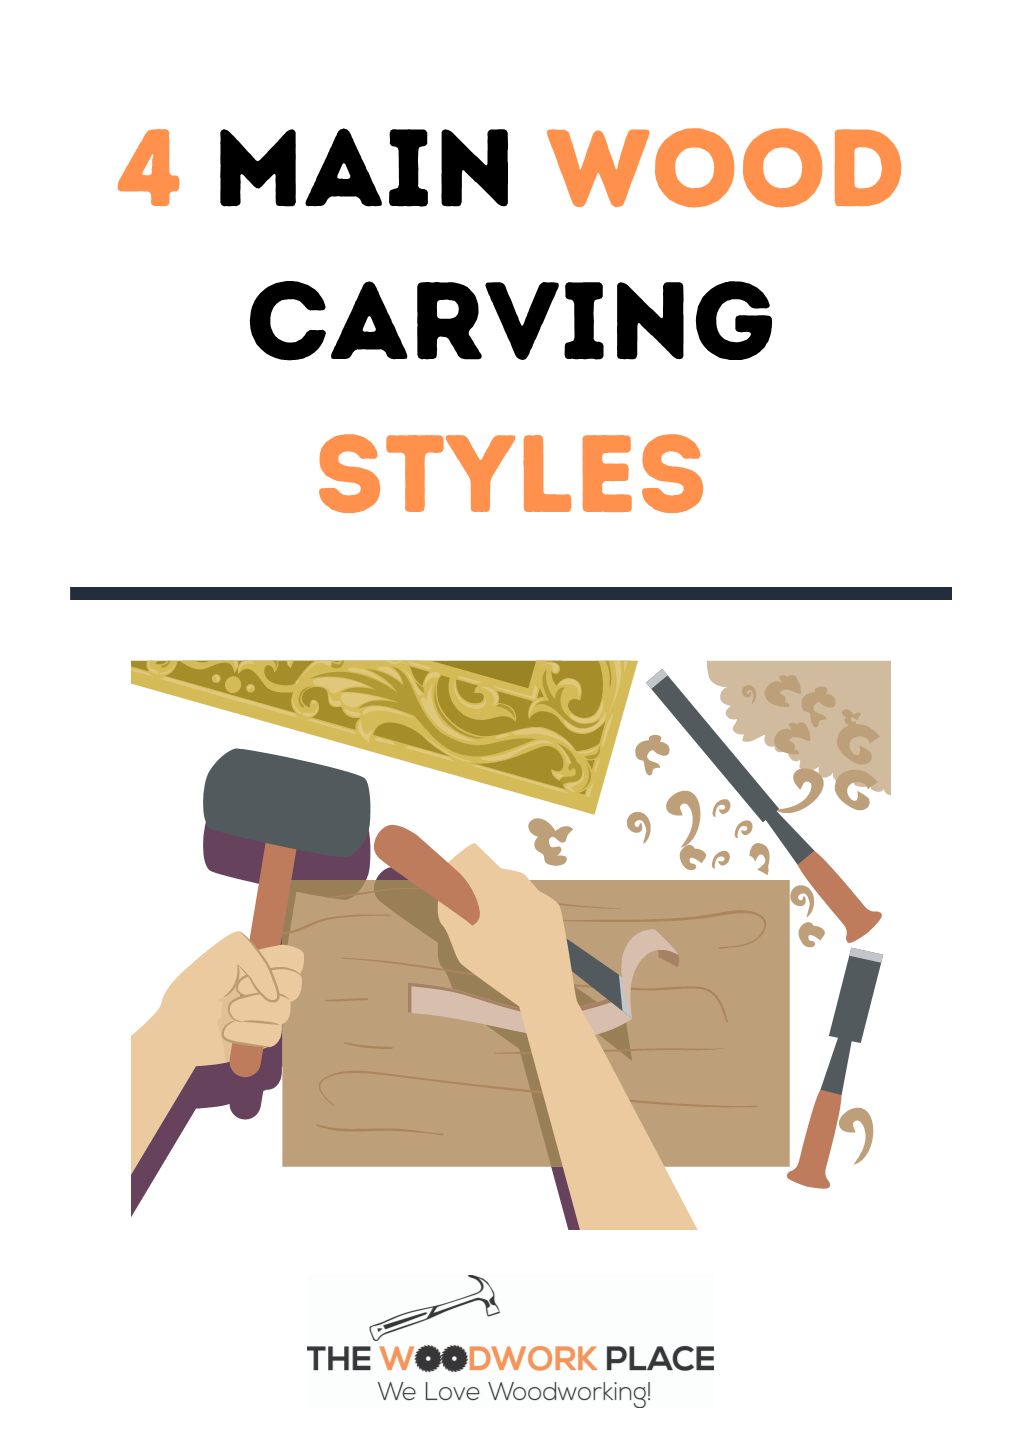 Four Main Types of Wood Carving Styles!